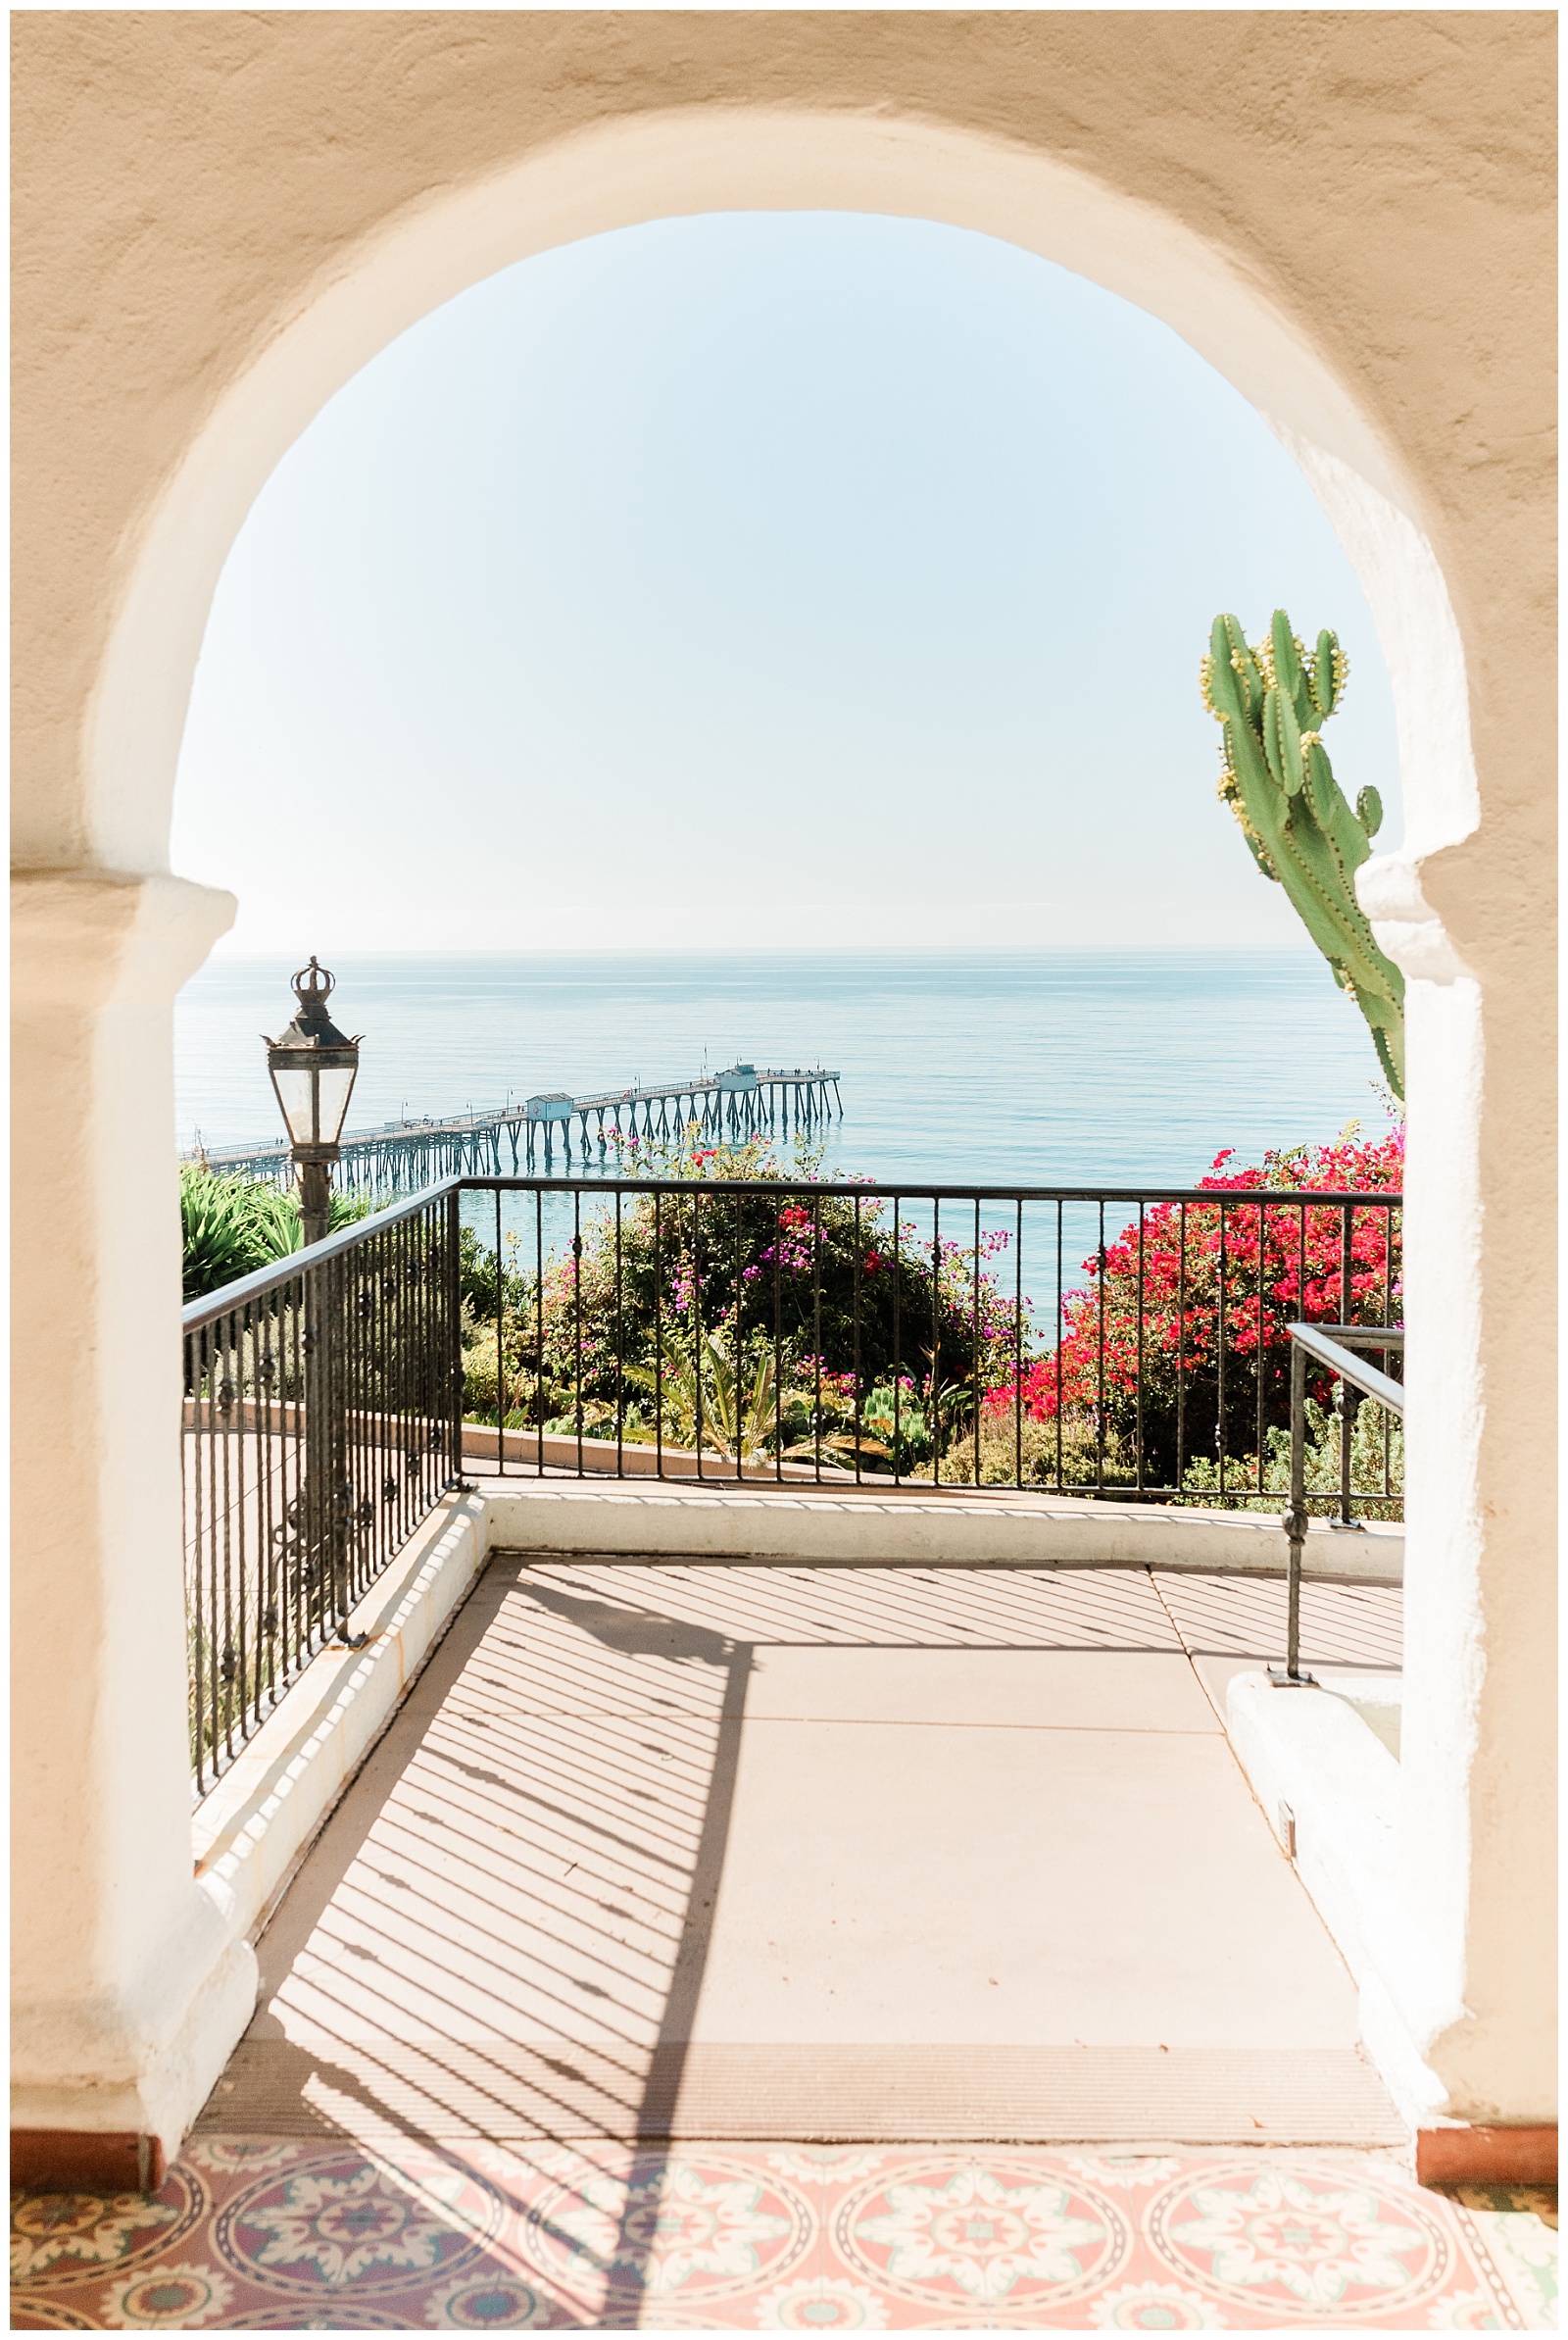 A view of the San Clemente pier and the Pacific Ocean framed in an archway at the Casa Romantica wedding venue in Orange County.